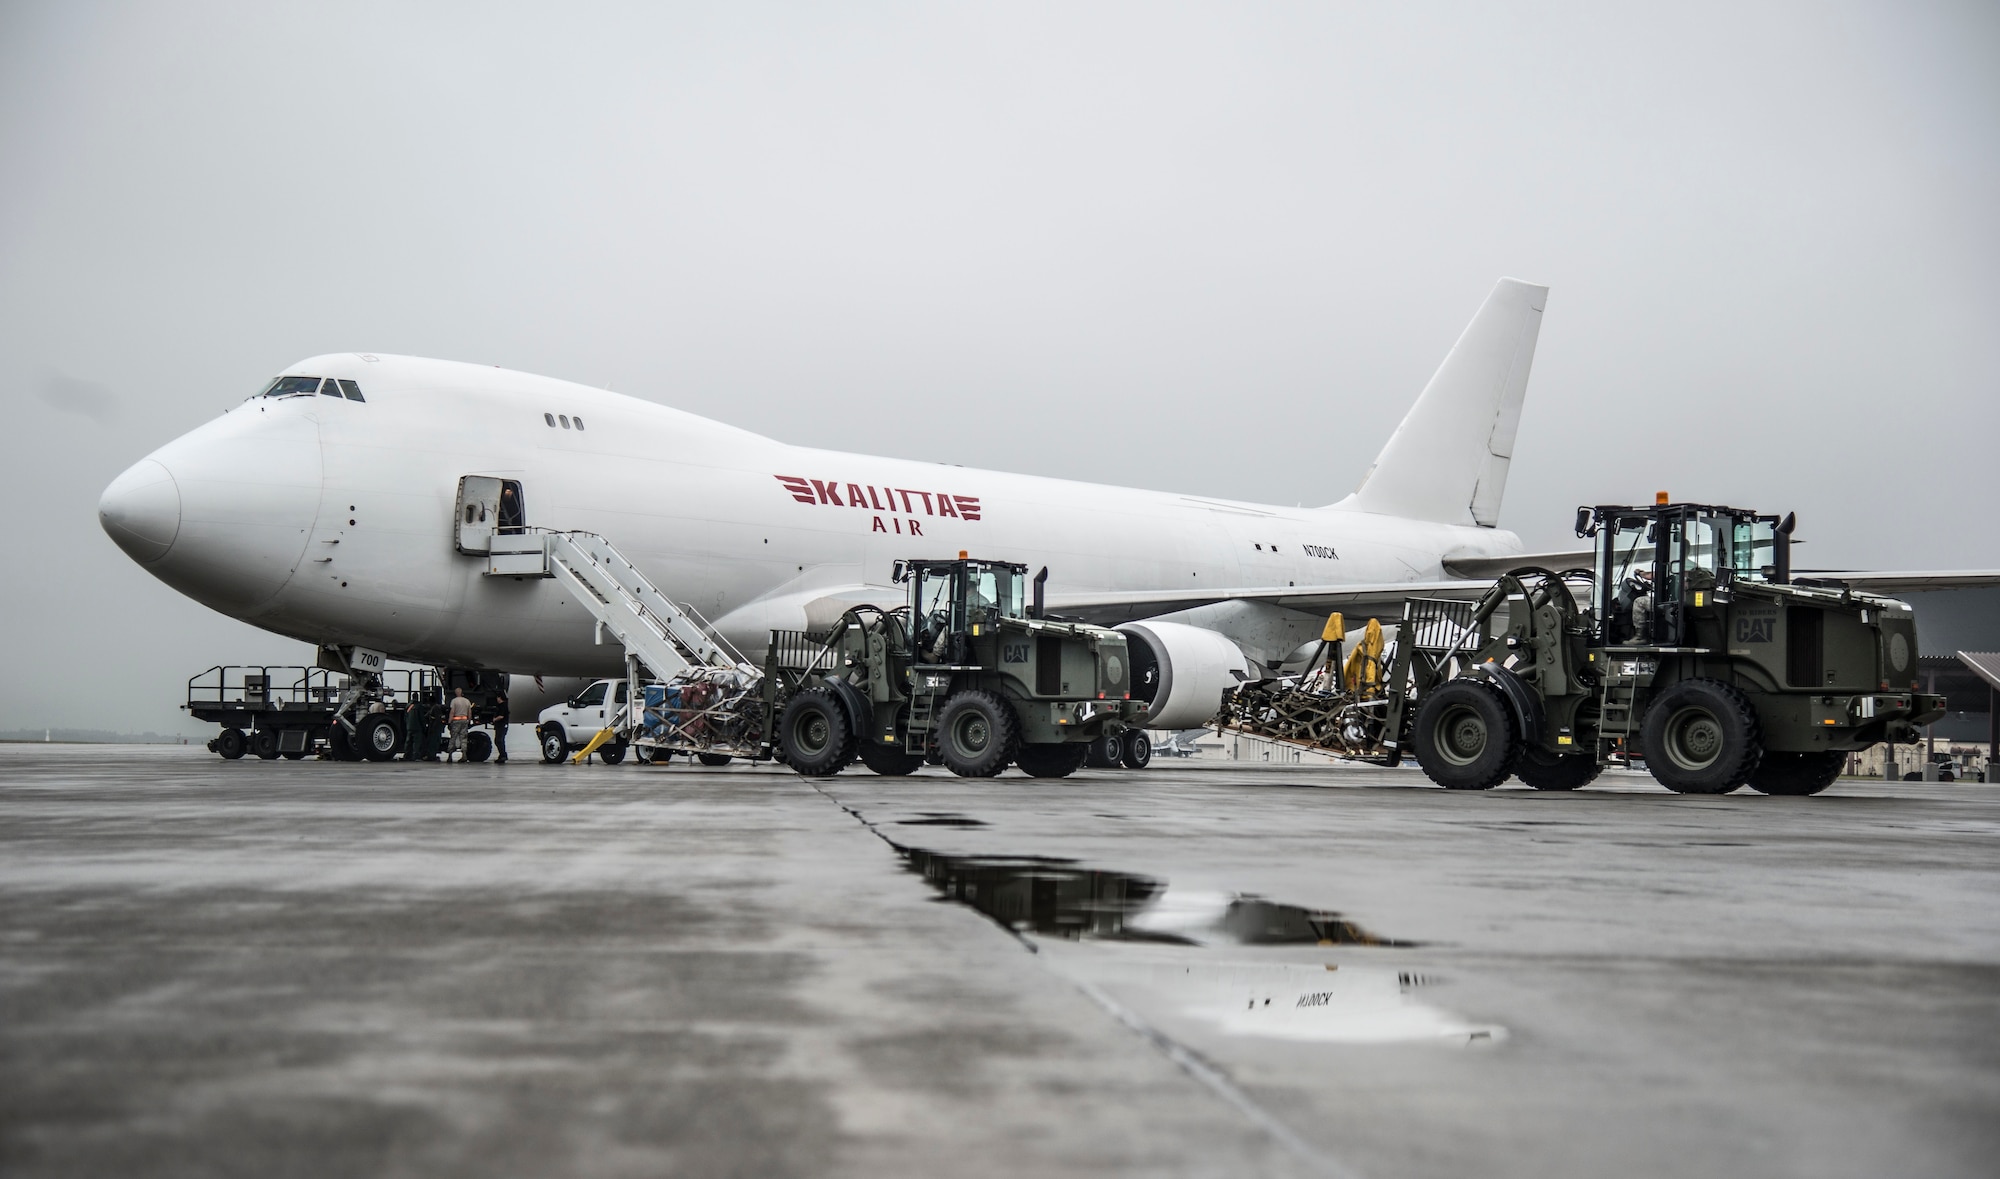 U.S. Air Force Airmen from the 35th Logistics Readiness Squadron operate k-loaders at Misawa Air Base, Japan, July 17, 2016. The Airmen loaded more than 461,000 pounds of cargo destined for Exercise Pitch Black, a three-week multi-national large force employment exercise being conducted from Royal Australian Air Force Base Darwin and RAAF Base Tindal, from July 29 to Aug. 19, 2016. (U.S. Air Force photo by Senior Airman Brittany A. Chase)